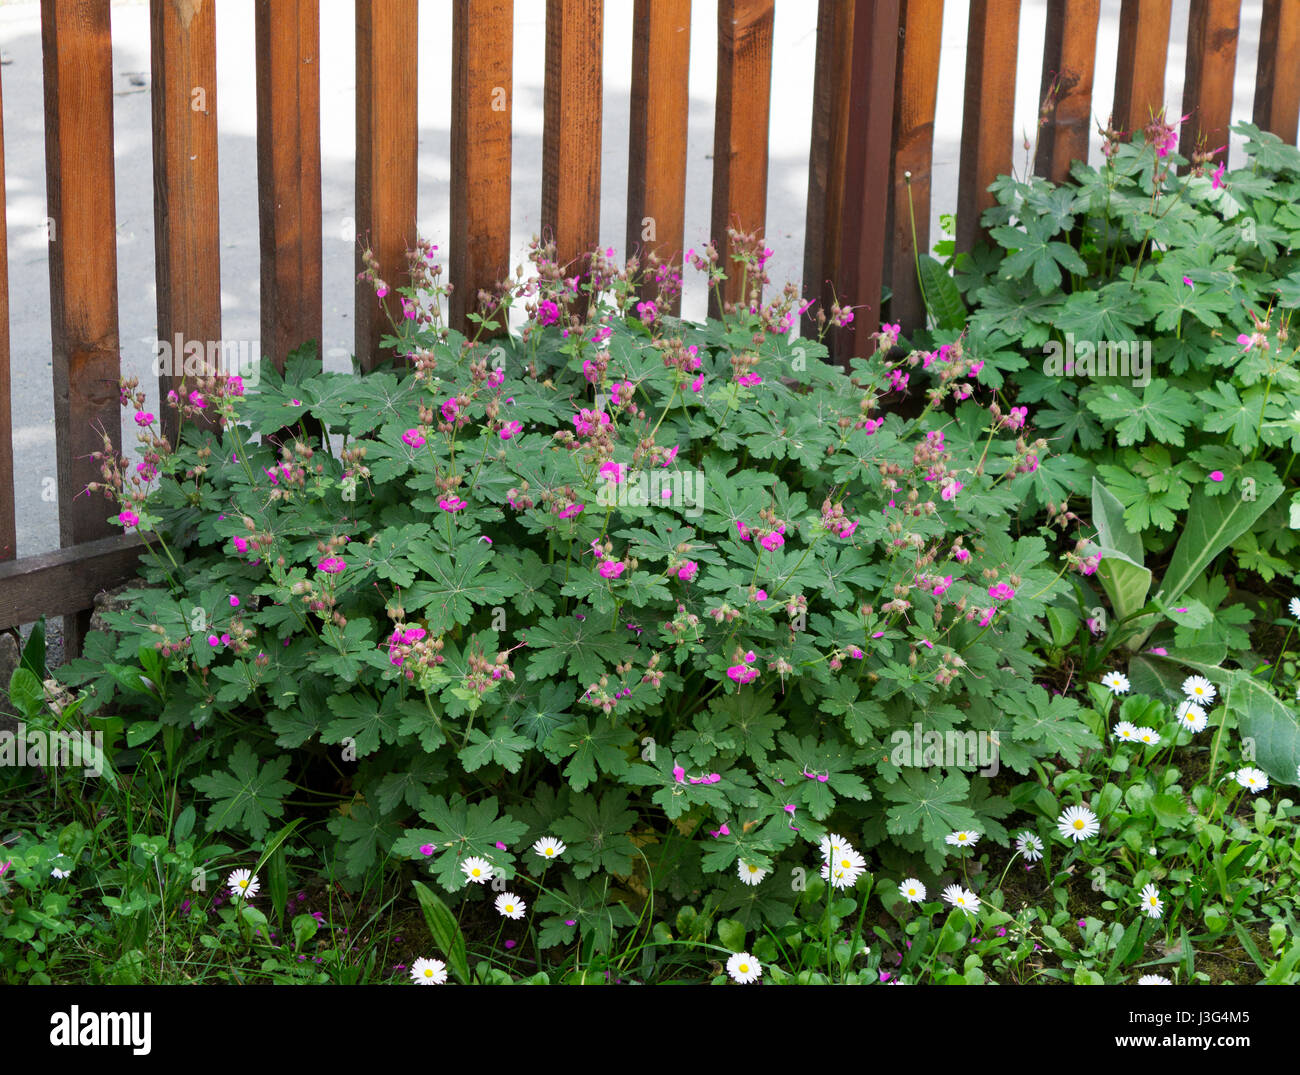 Bigroot Geranium High Resolution Stock Photography And Images Alamy